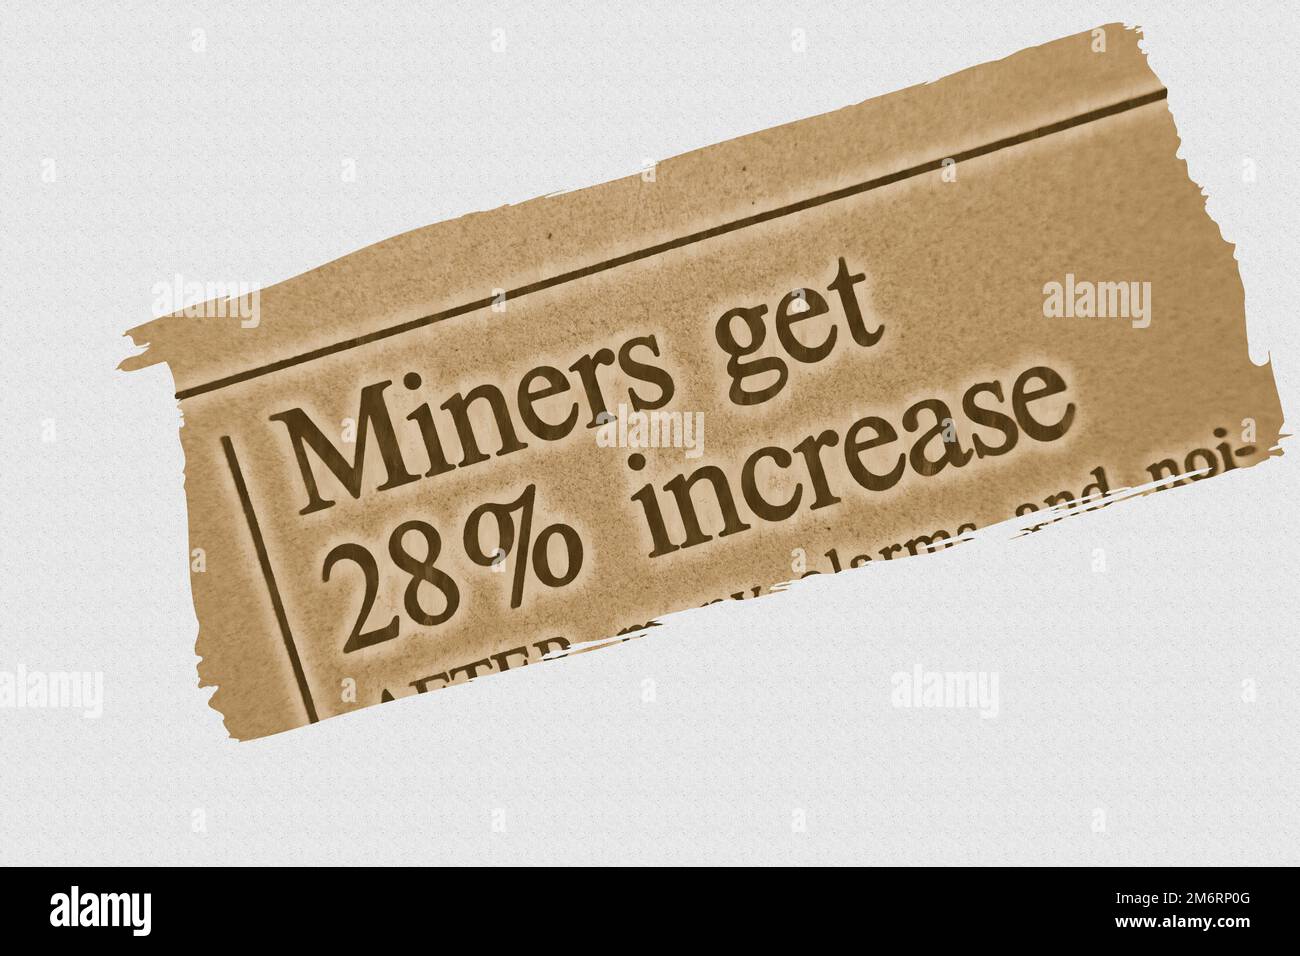 Miners get 28% increase - news story from 1975 newspaper headline article title with highlight sepia overlay Stock Photo